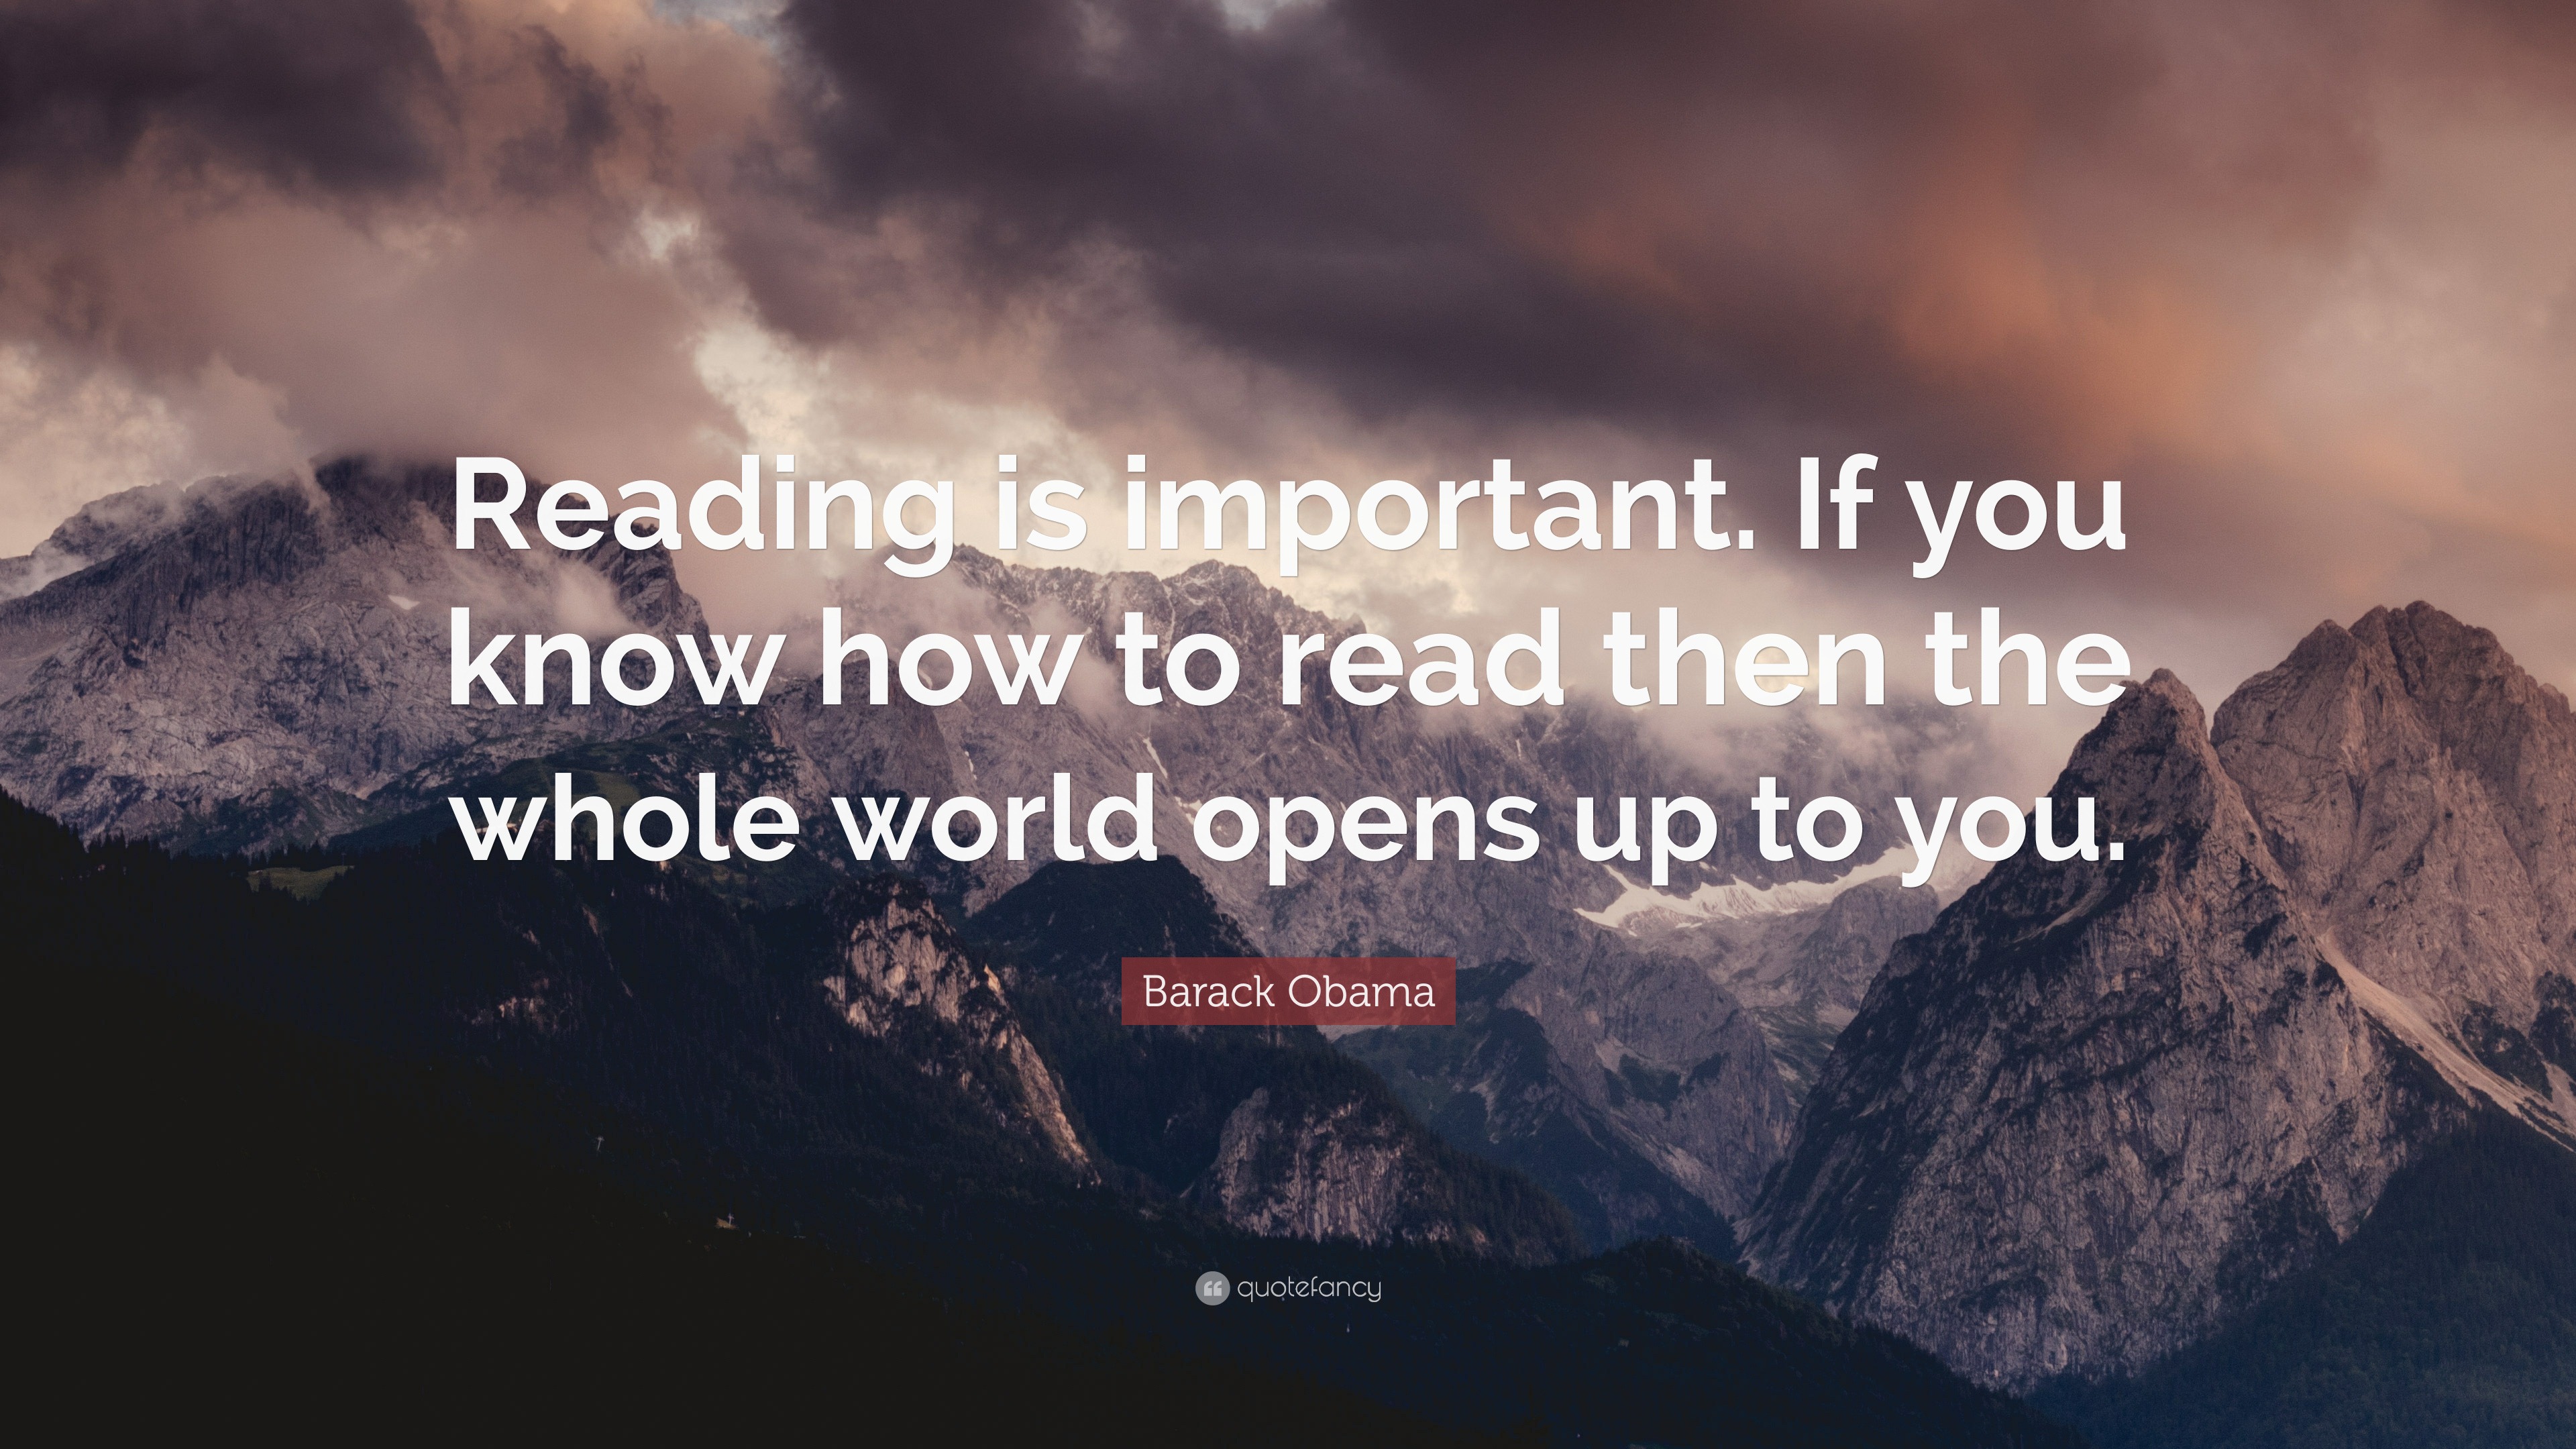 Barack Obama Quote: “Reading is important. If you know how to read then